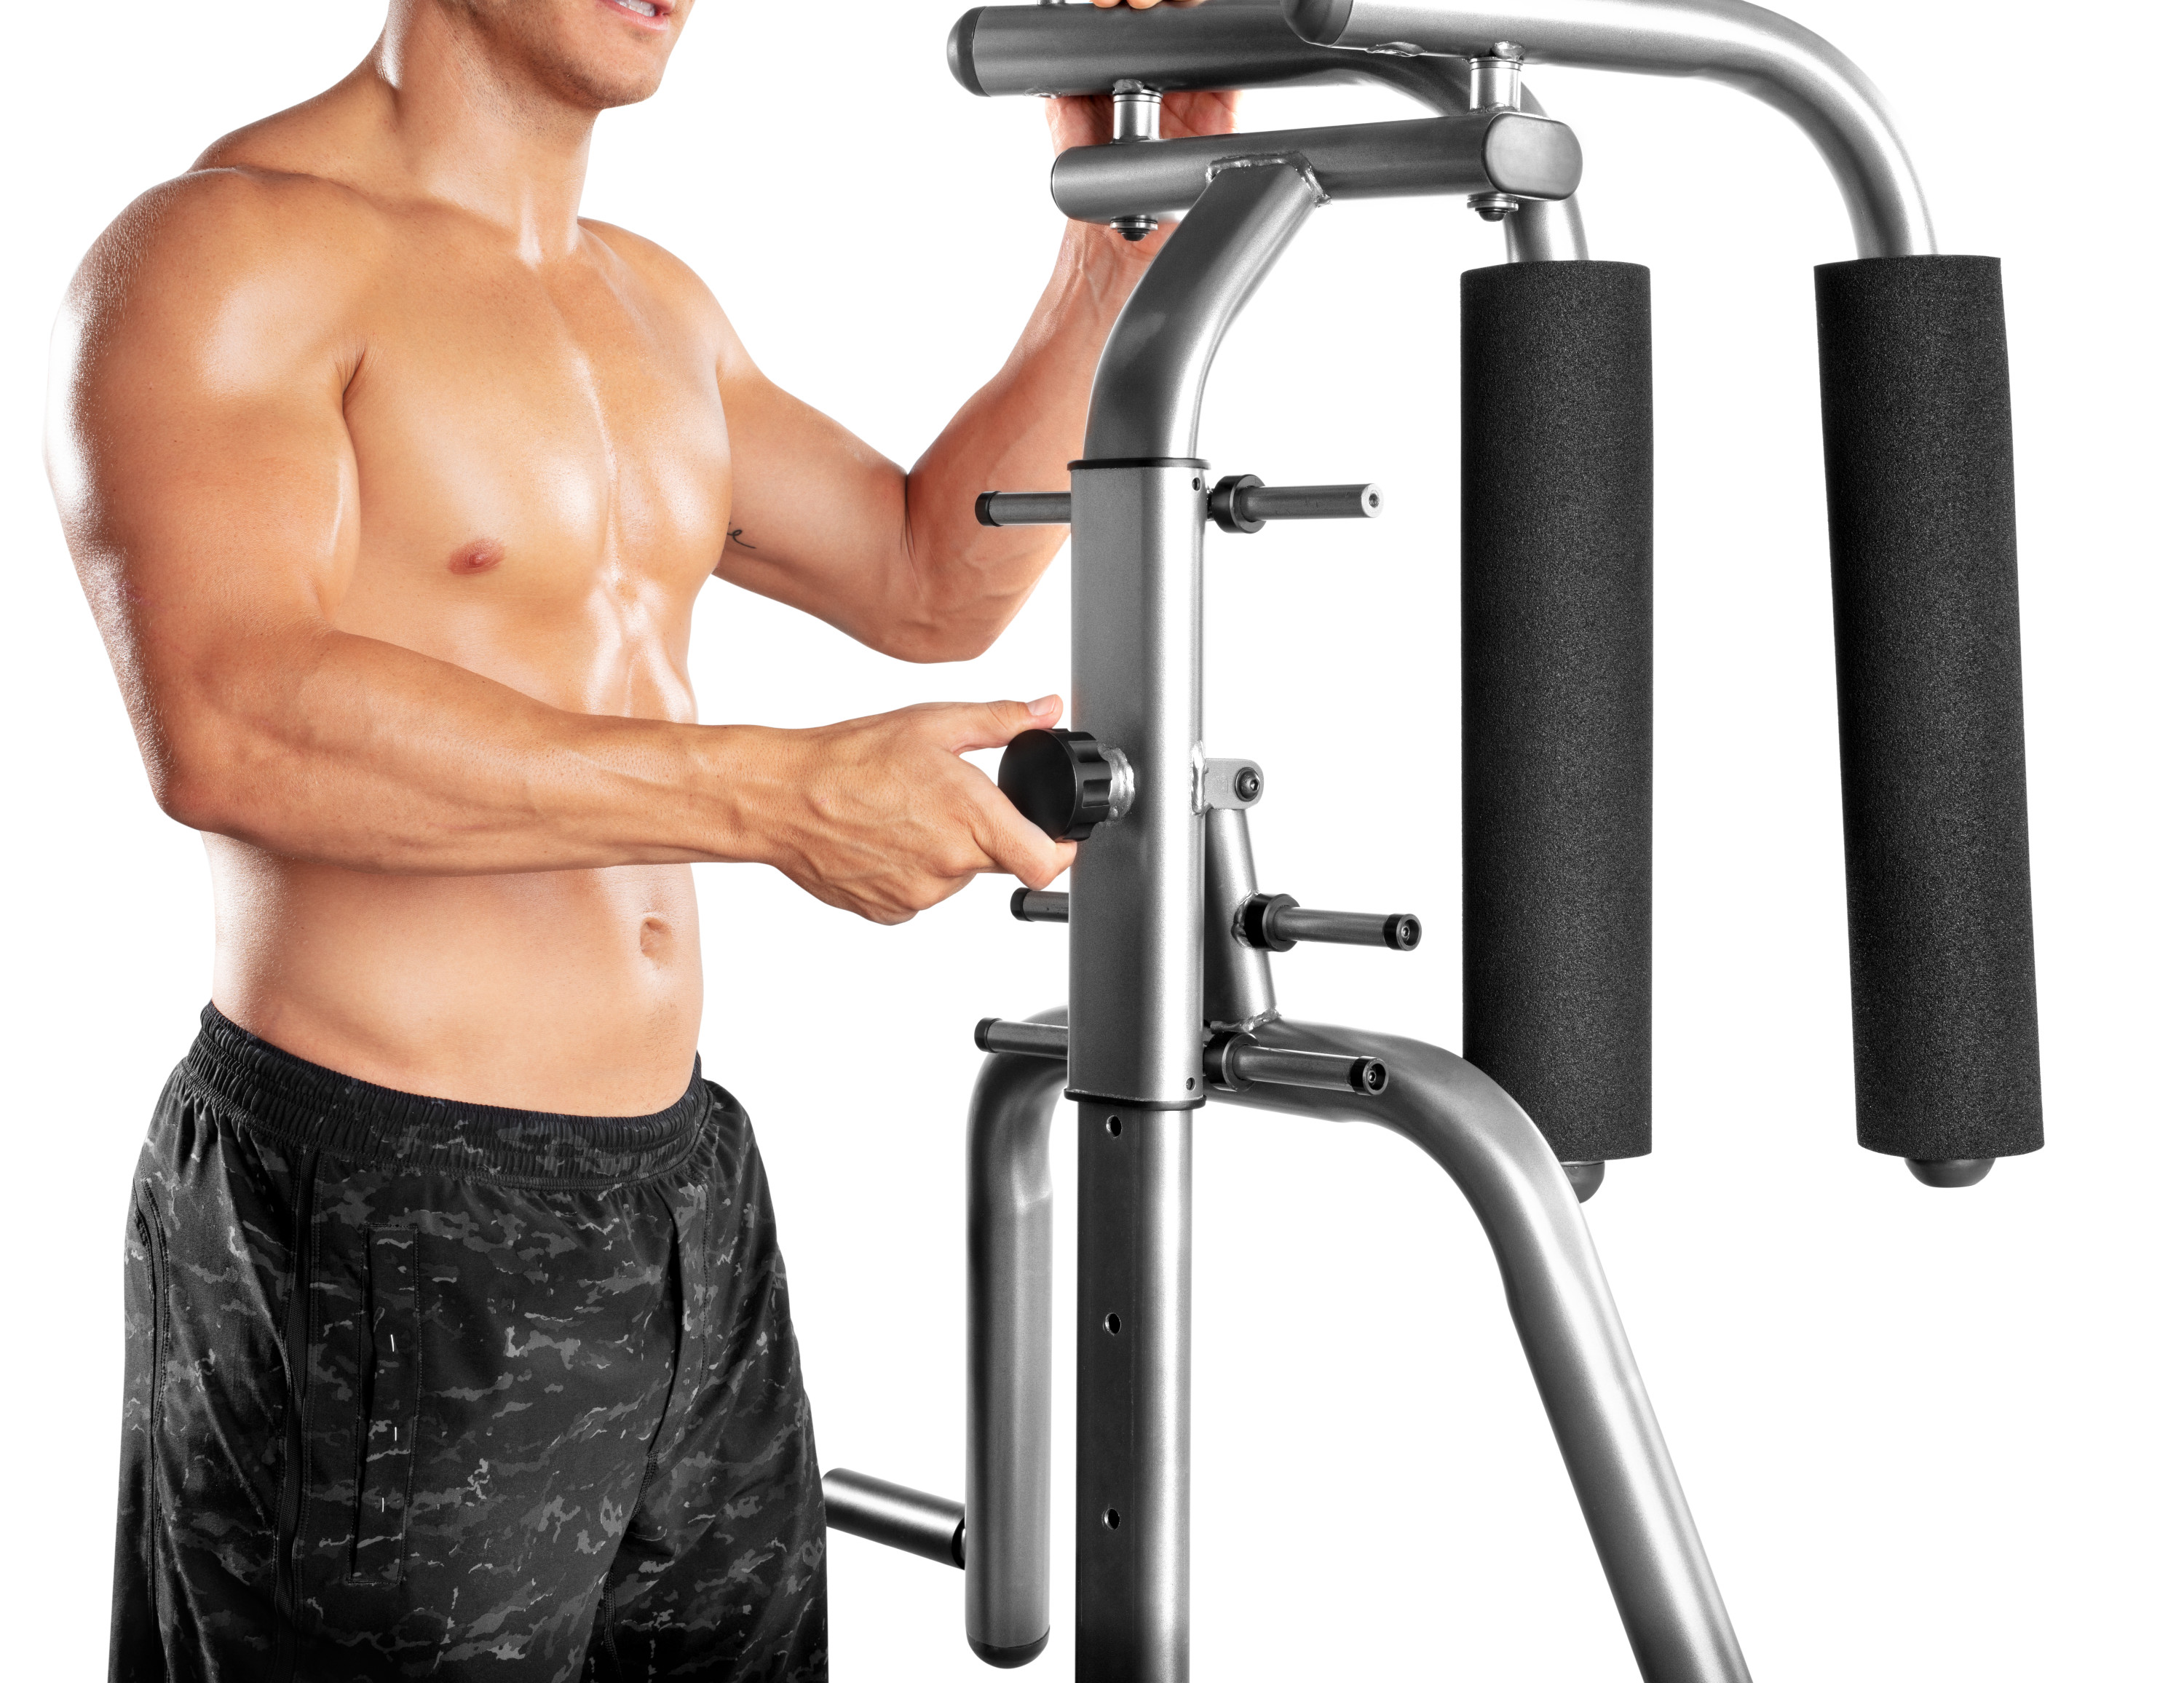 Weider Flex CTS Home Gym System with 14 Resistance Bands and Professionally-Designed Excercise Chart - image 4 of 11